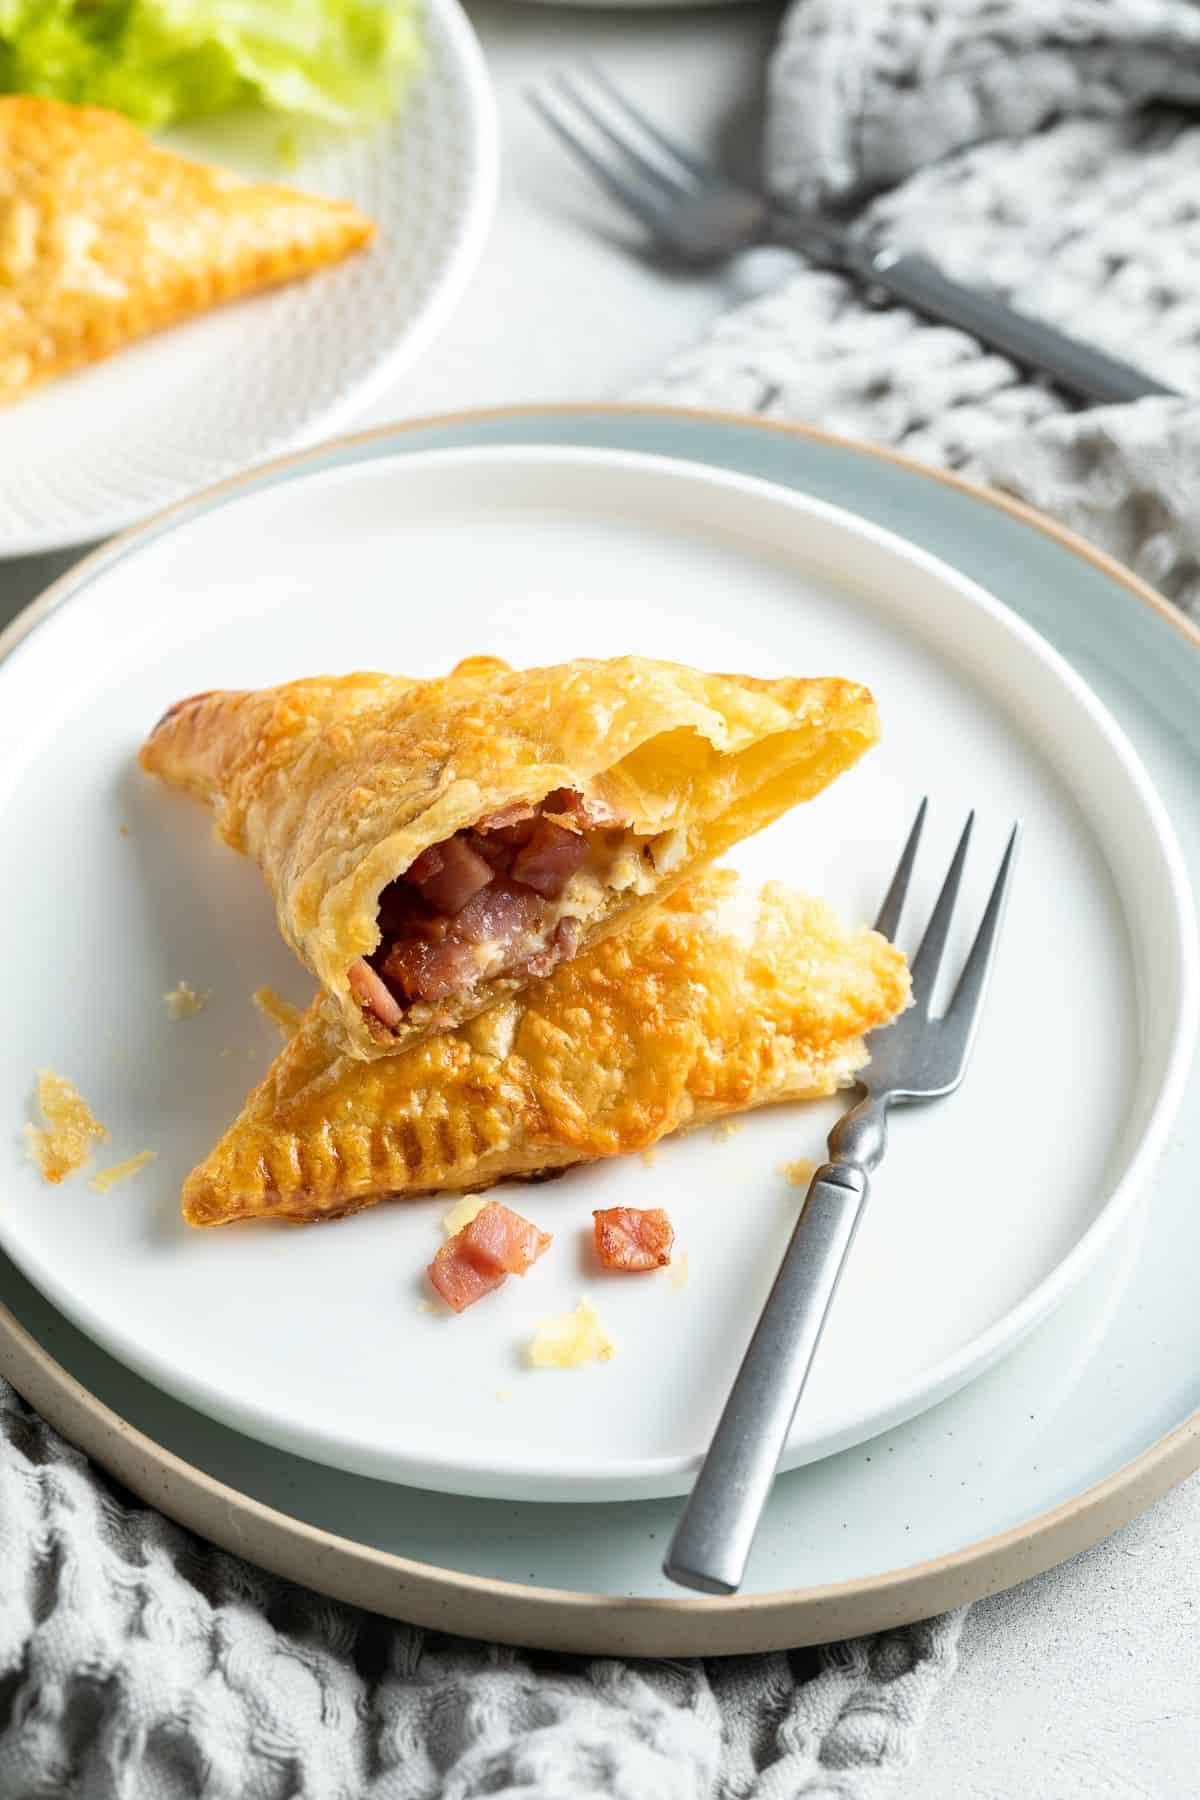 A bacon turnover cut in half, sitting on a white plate with a fork on the side.